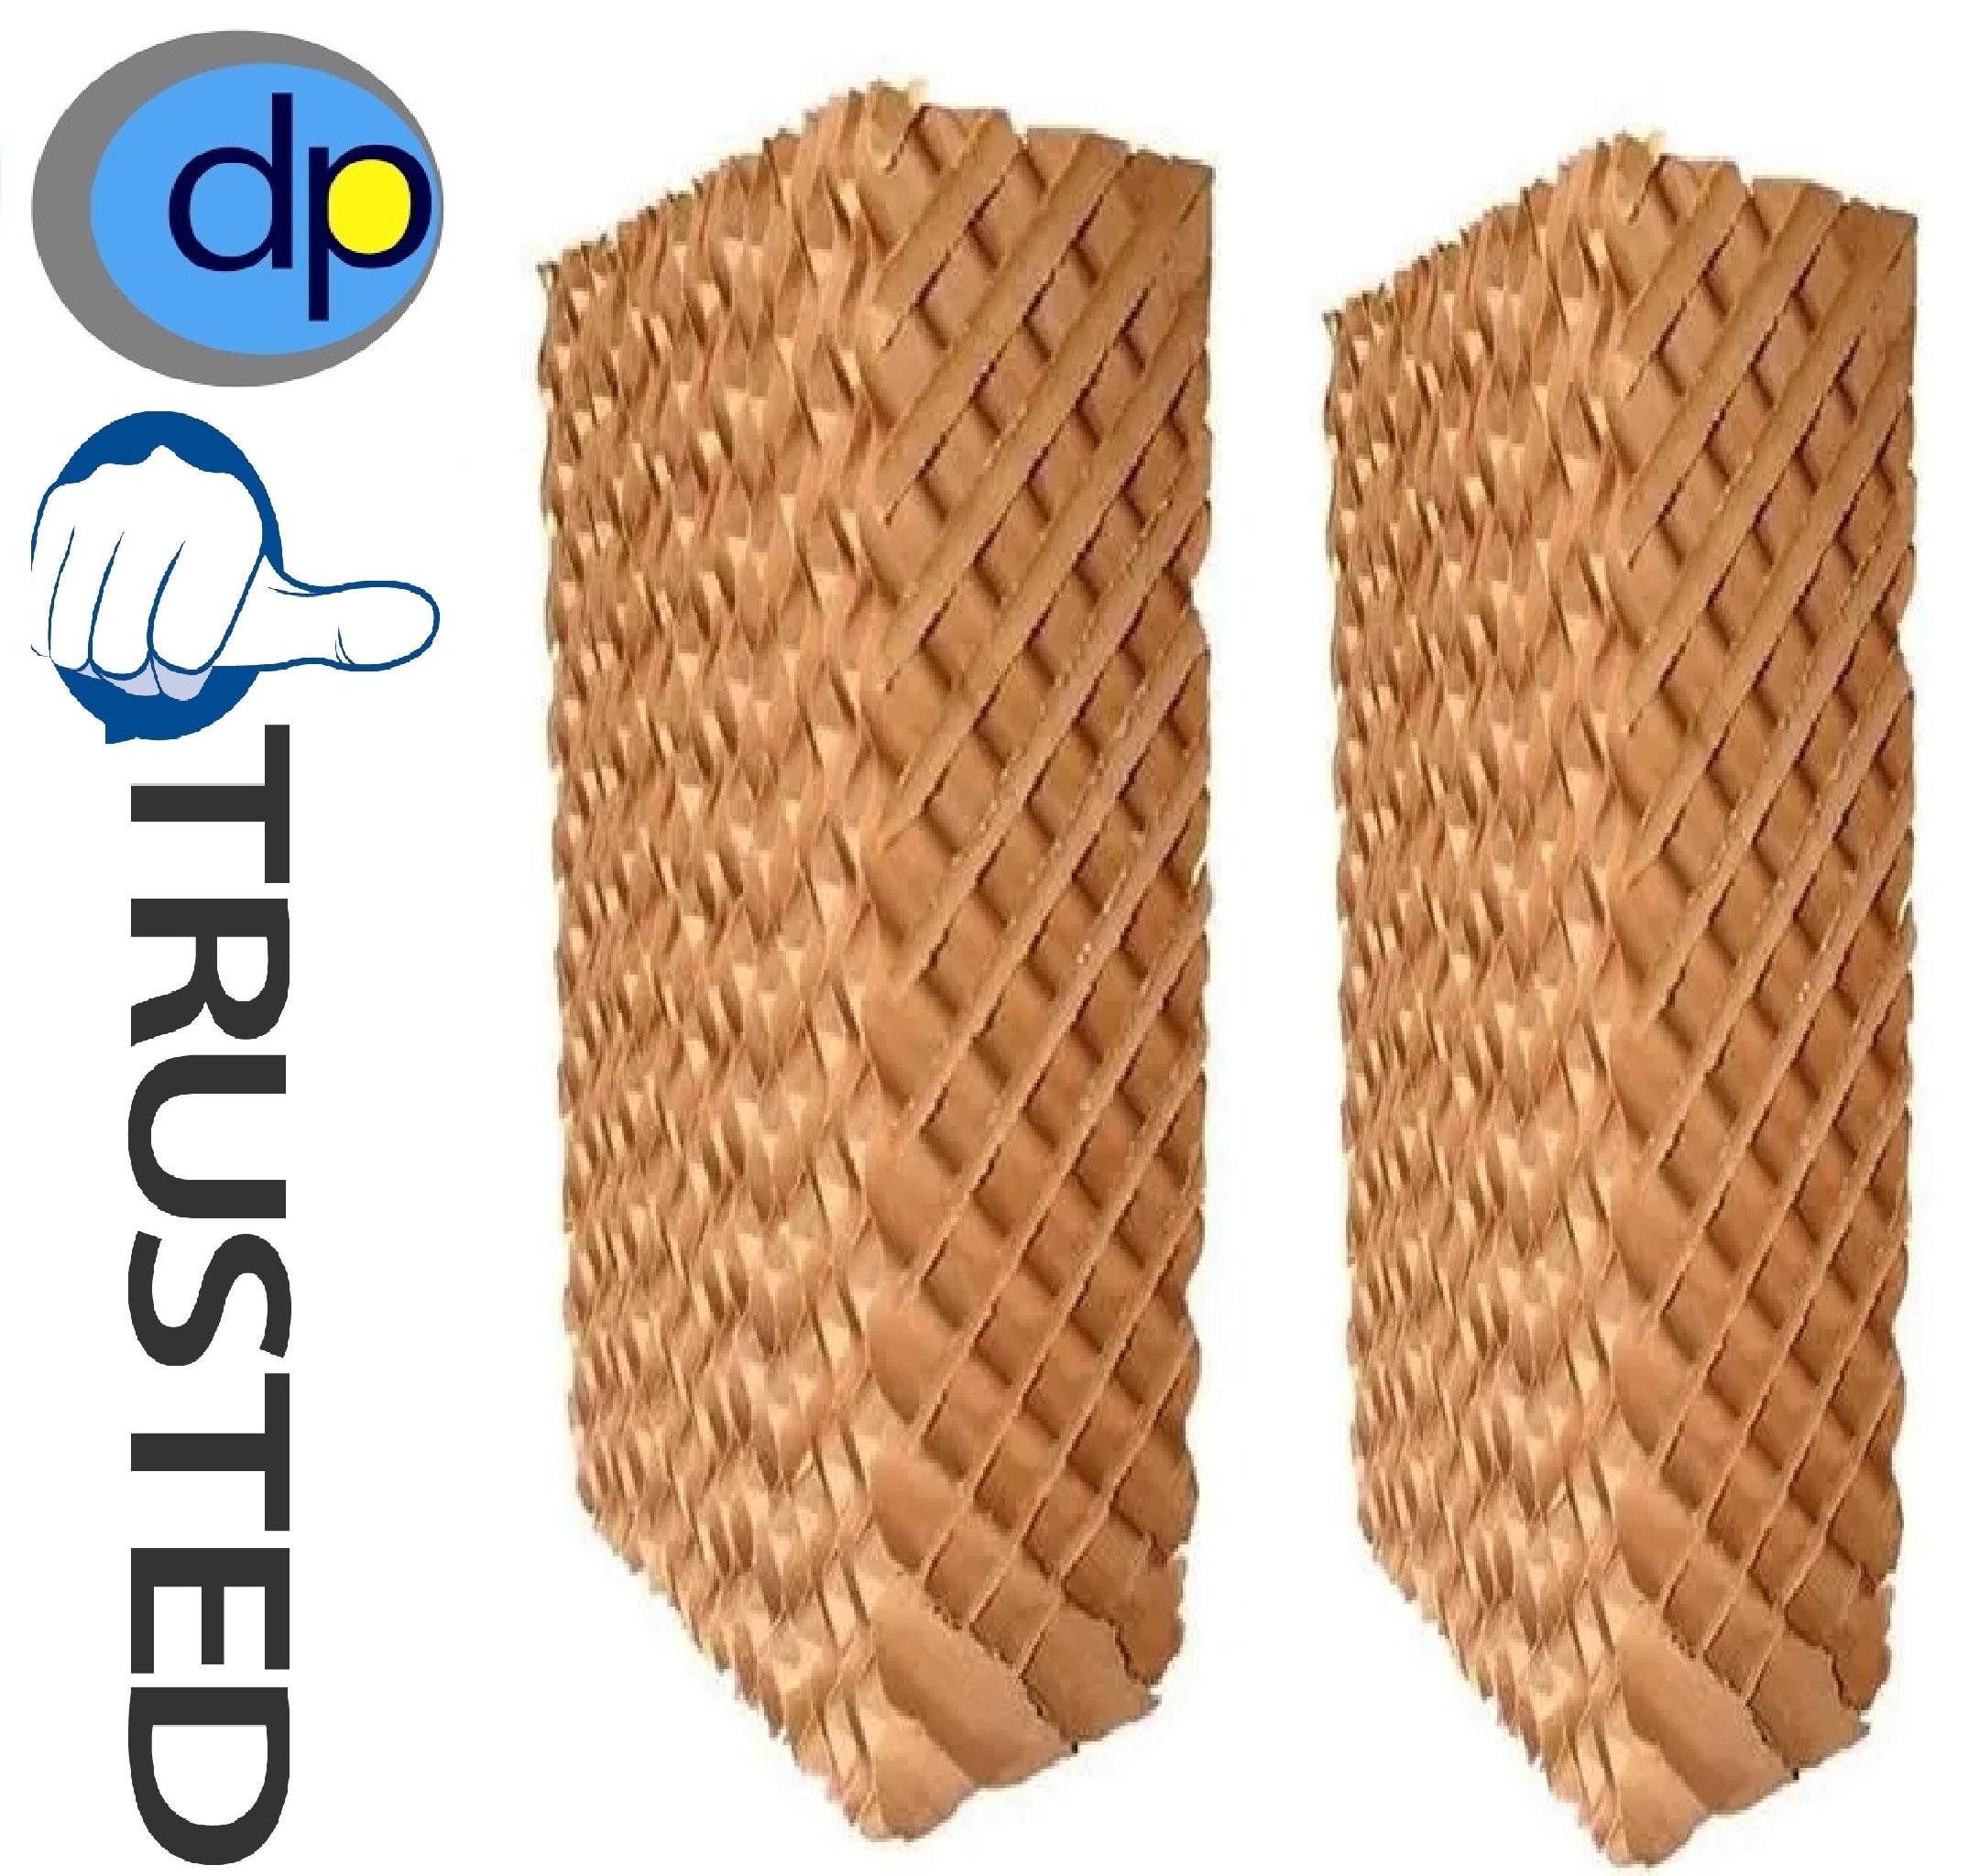 Honeycomb Padding by Air washer Unit - D.P.ENGINEERS